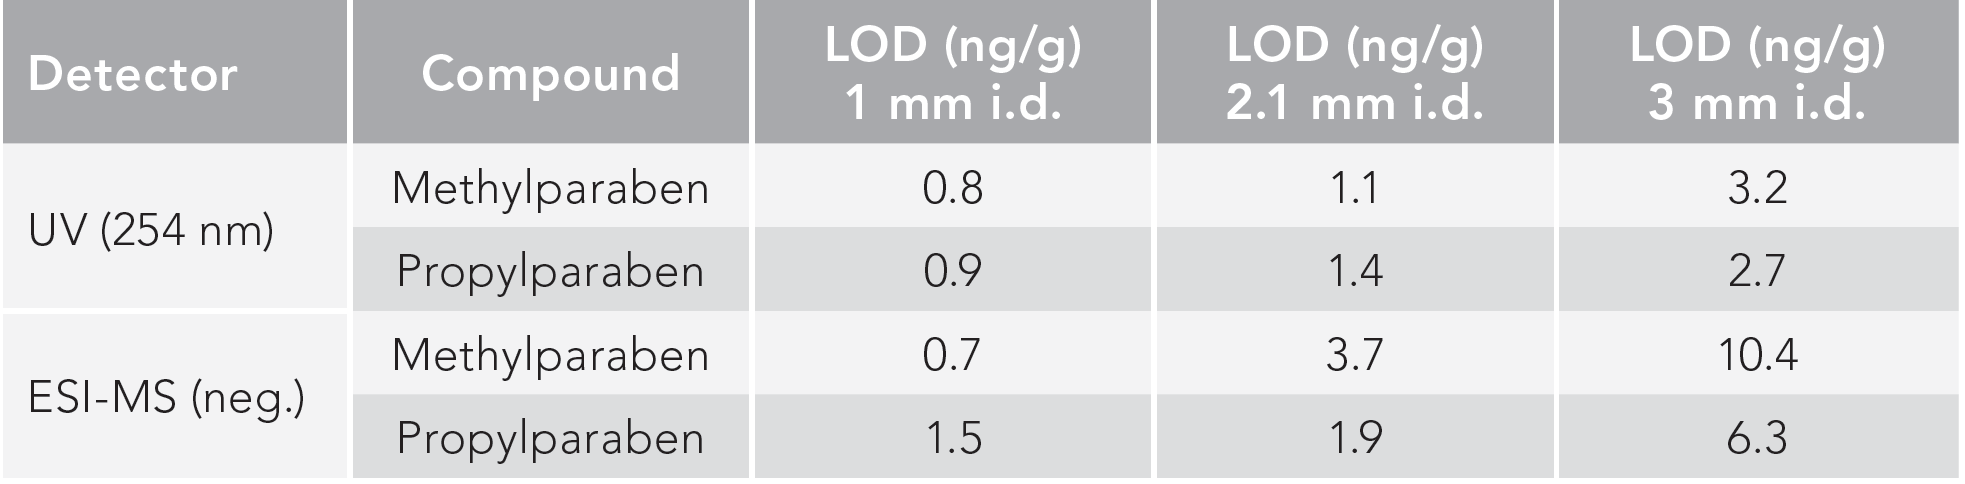 TABLE I: LODs obtained for methyl and propylparaben under comparable conditions for three 2D column i.d.s. The flow rates on the 1-, 2.1-, and 3-mm i.d. columns were 0.45, 1.87, and 3.82 mL/min, respectively. LODs were calculated by: LOD = 3.3 σ/slope, where σ corresponded to the residual standard deviation of calibration curves constructed close to the LODs (10). Flow splitting was required prior to the MS for the 2.1- and 3-mm i.d. 2D columns, such that on all columns 450 μL/min was introduced in the ESI-MS.